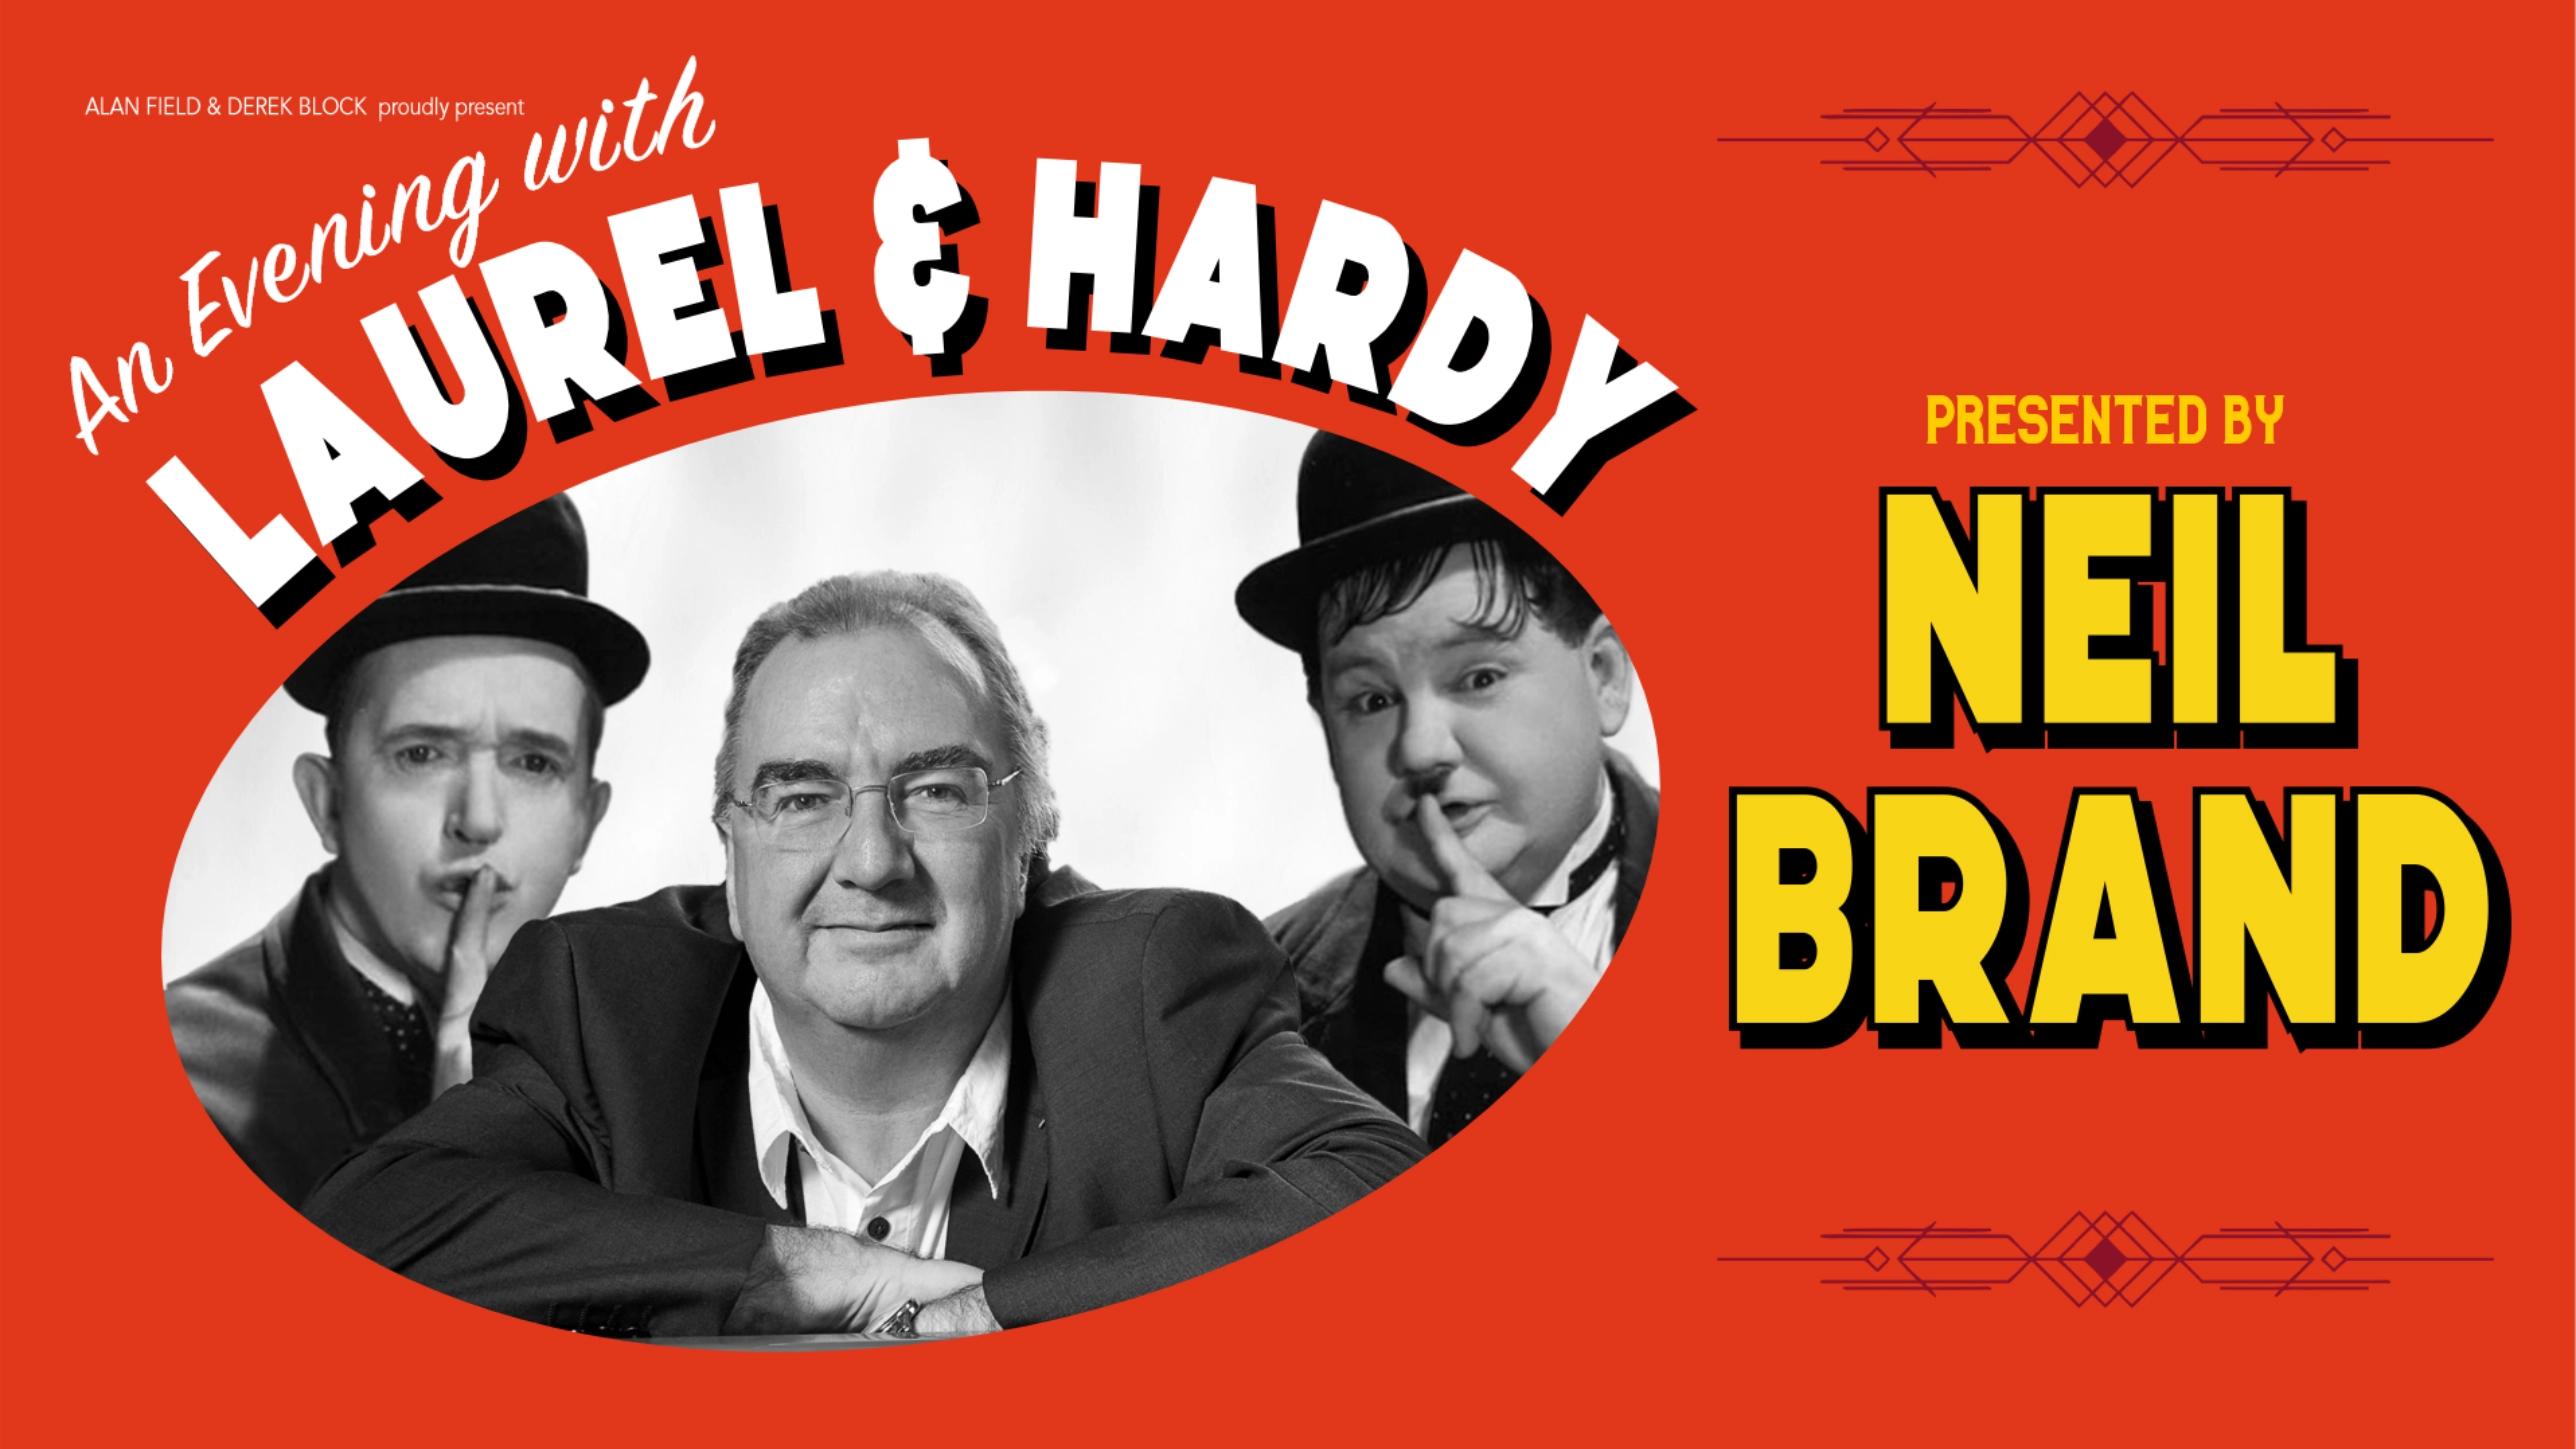 An Evening with Laurel & Hardy - Presented by Neil Brand